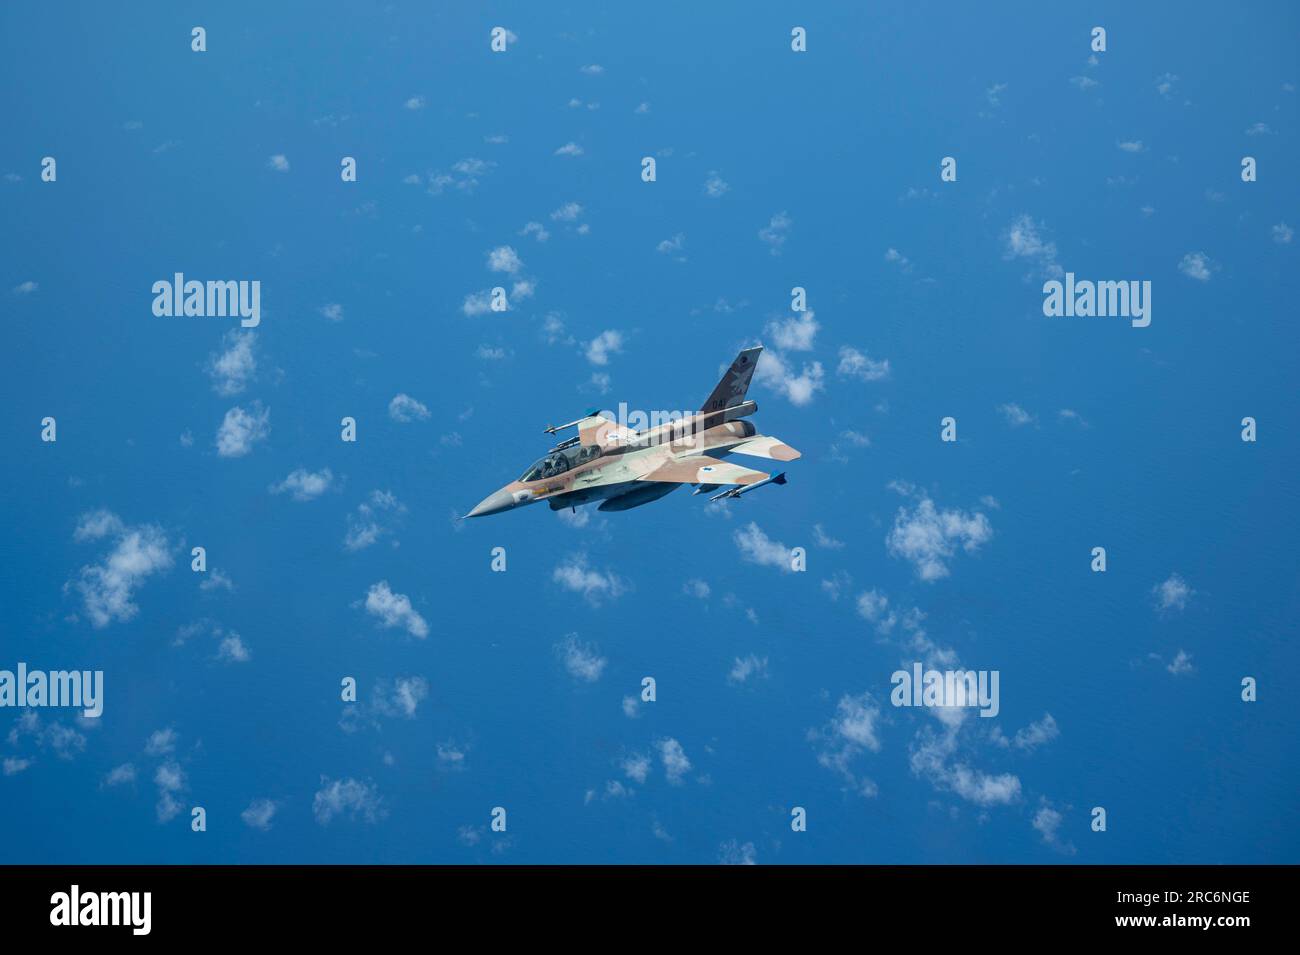 An Israeli Air Force F-16 flies after in-flight refueling operations with a U.S. Air Force KC-10 Extender during exercise Juniper Oak 23.3 above the U.S. Central Command area of responsibility, July 11, 2023. The U.S. is committed to its partnership with Israel while developing and maintaining interoperability with its partners, and ensuring regional security by providing essential training to deter adversaries from taking aggressive actions or malign activities against the U.S., coalition and partners. (U.S. Air Force photo by Senior Airman Jacob Cabanero) Stock Photo